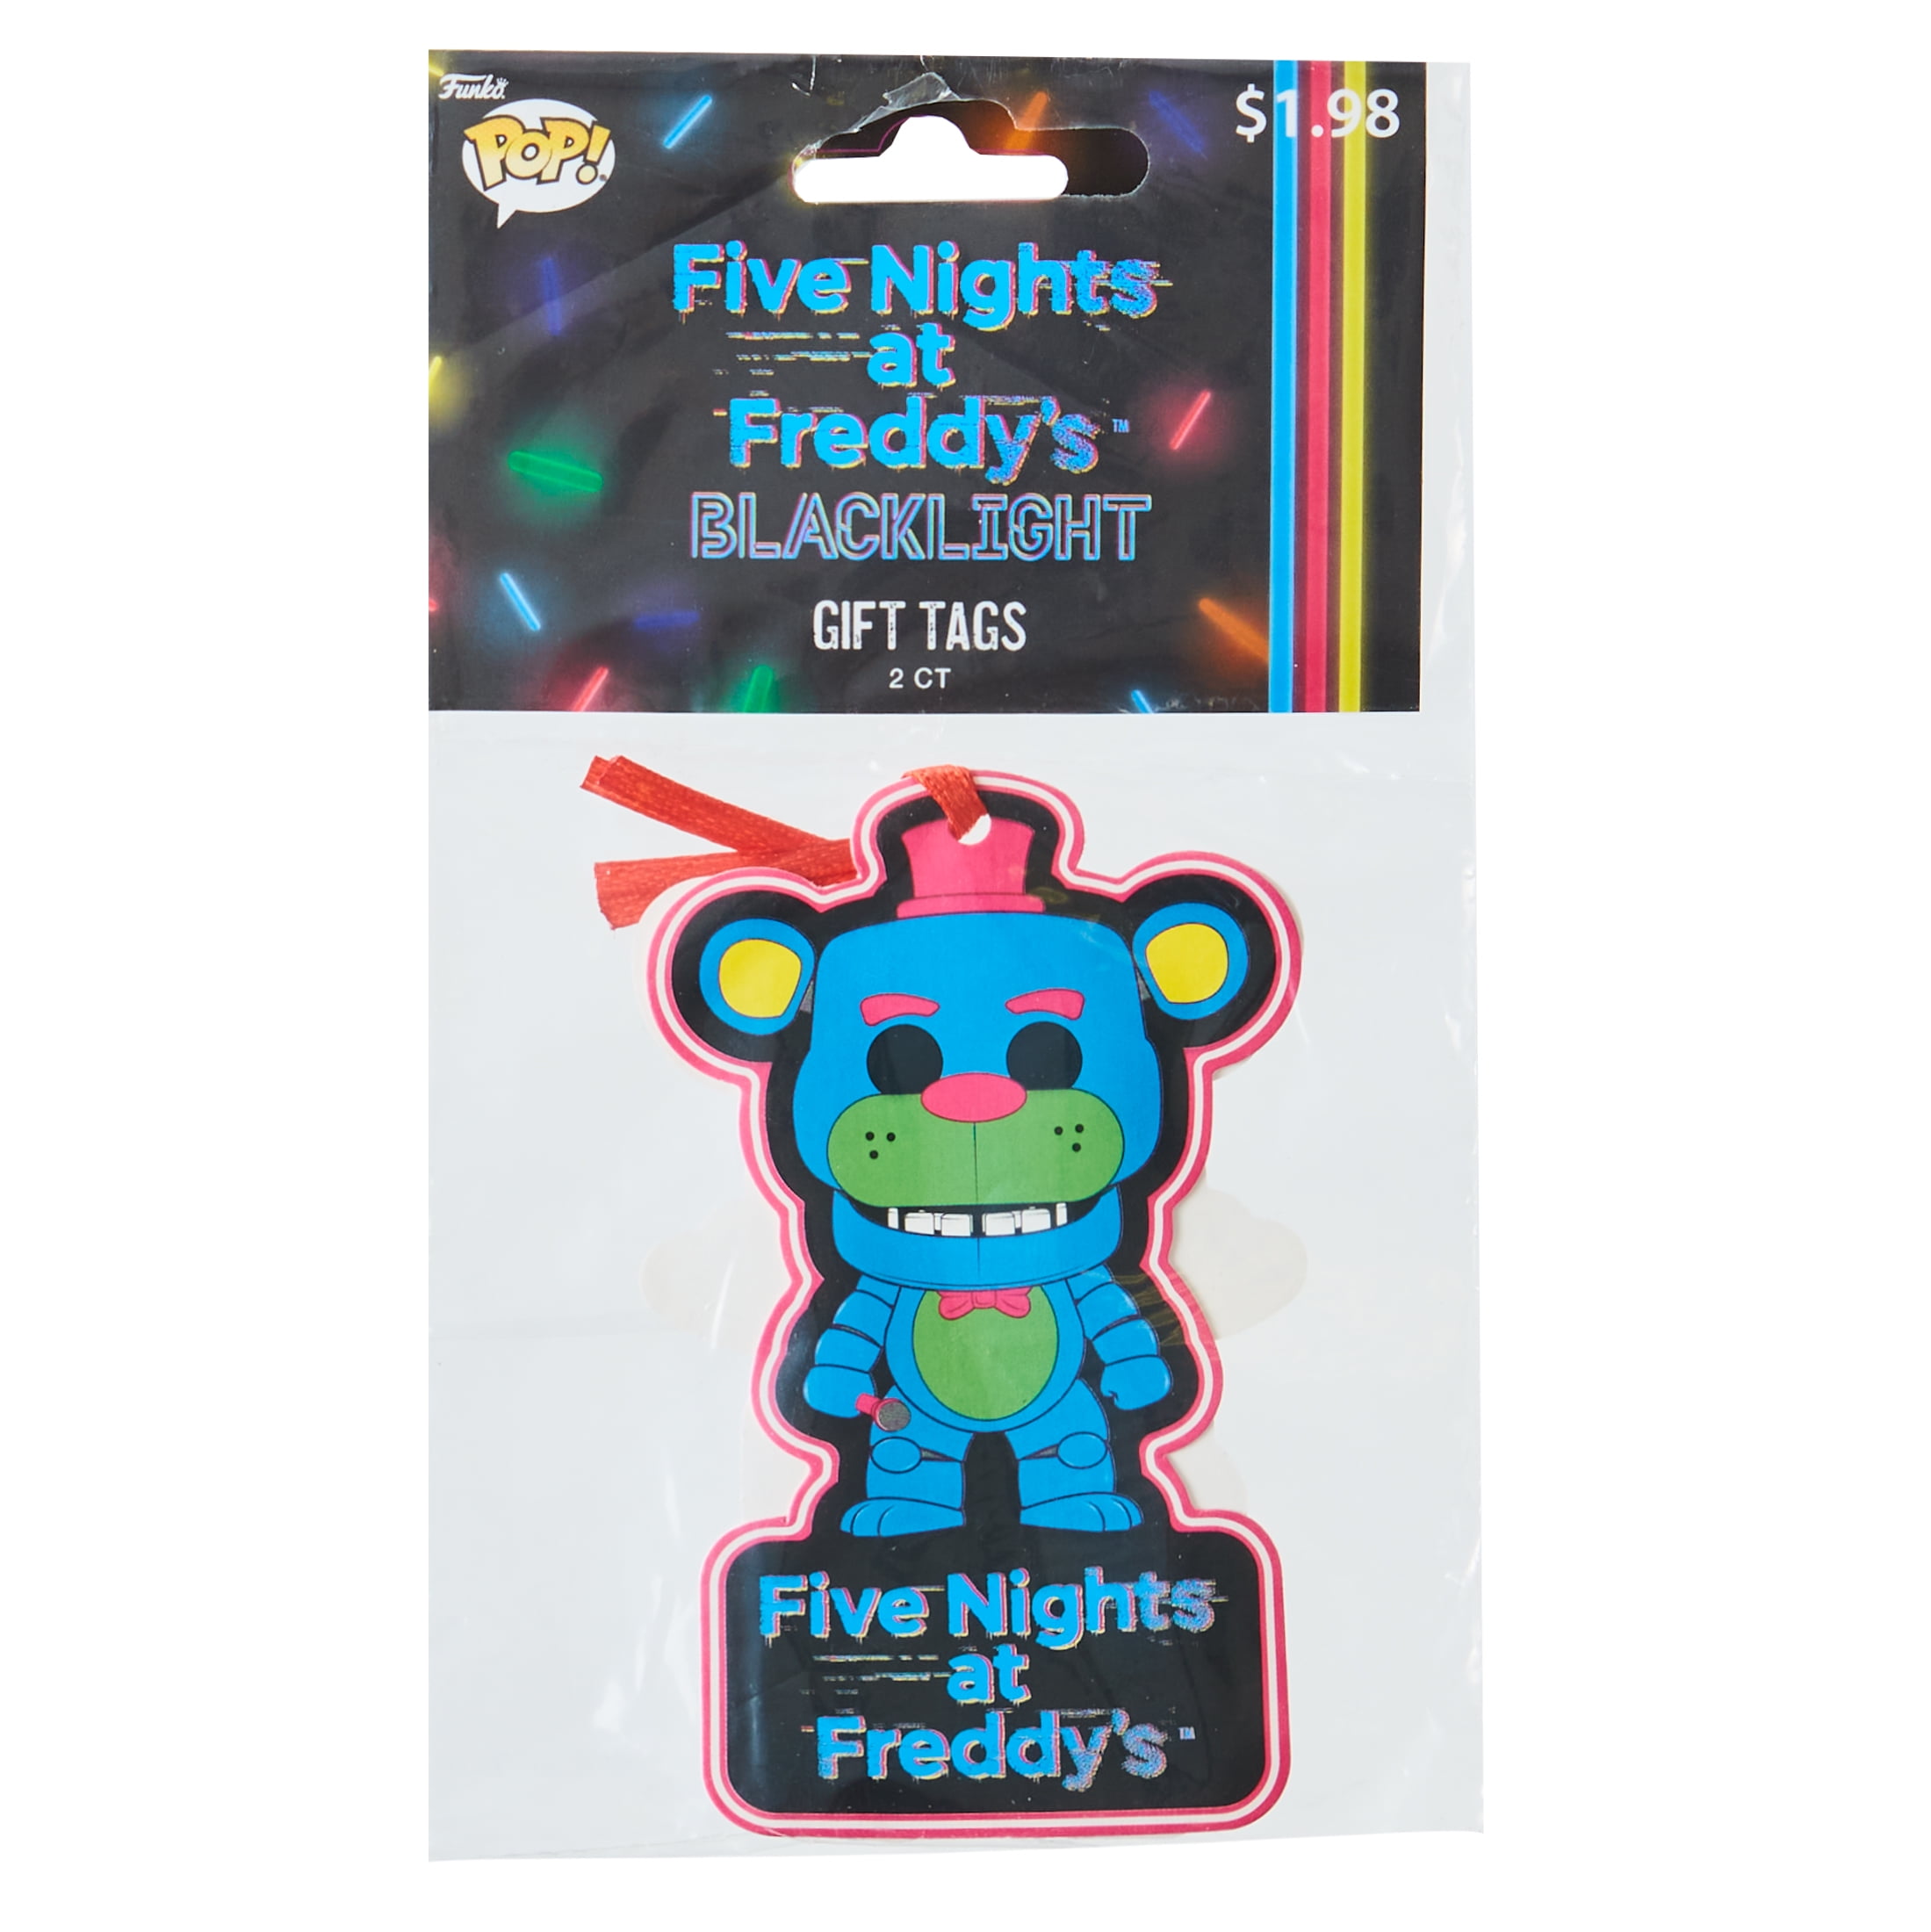 New fnaf gift wrap and gift bags by funko review : r/fivenightsatfreddys